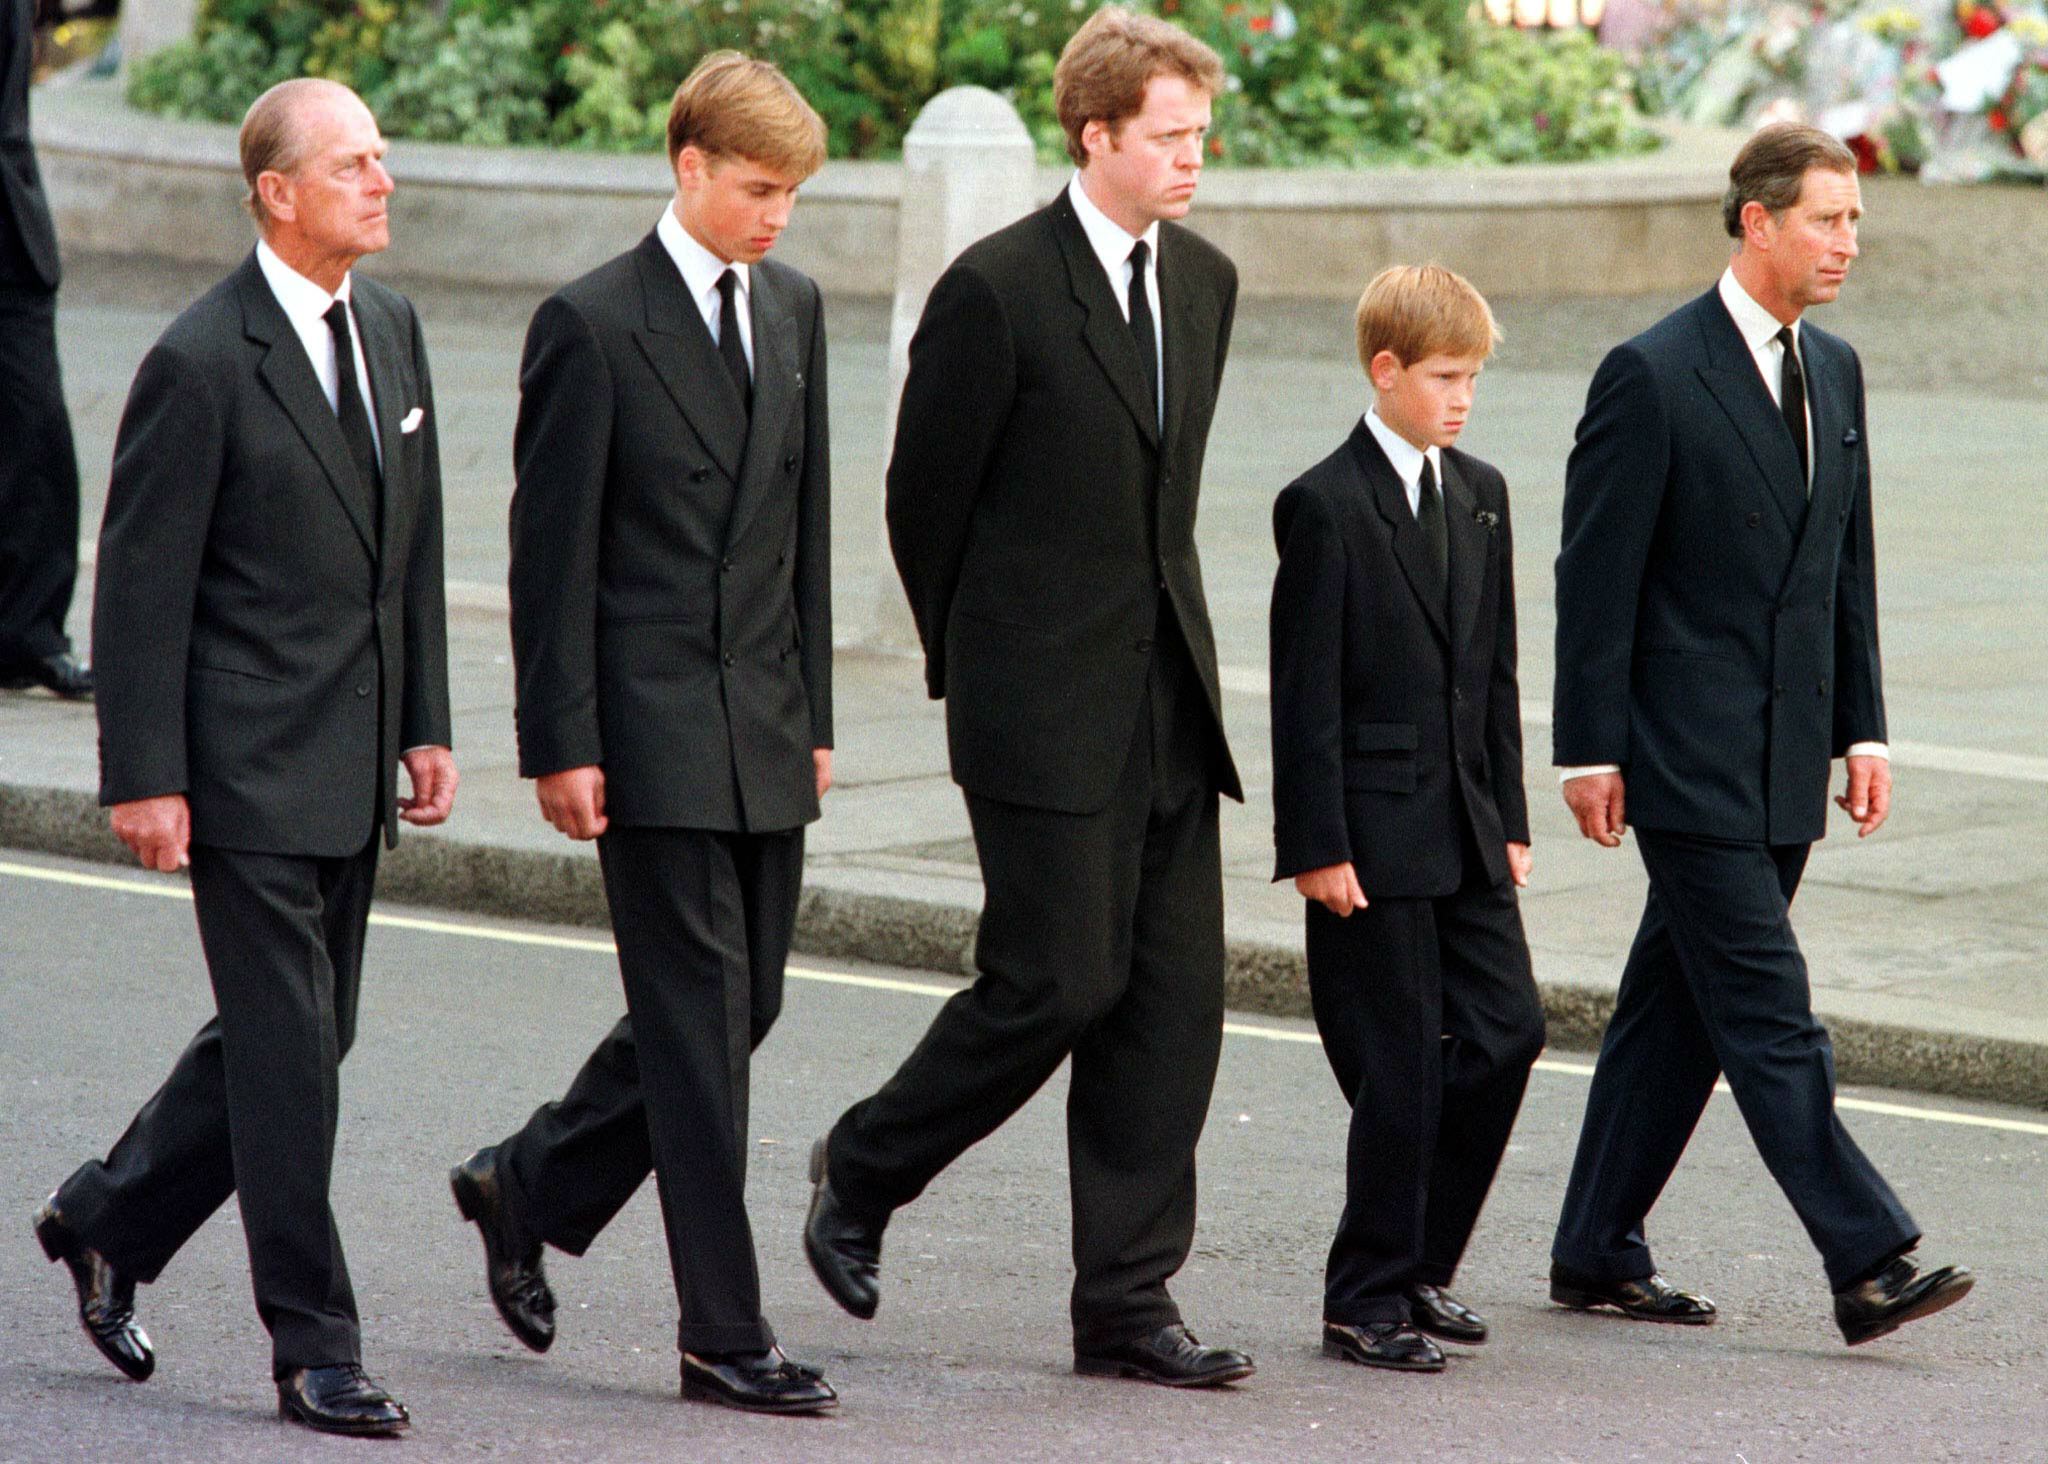 The Duke of Edinburgh, Prince William, Earl Spencer, Prince Harry and Prince Charles walk outside Westminster Abbey during the funeral service for Diana, Princess of Wales on September 6, 1997 | Source: Getty Images